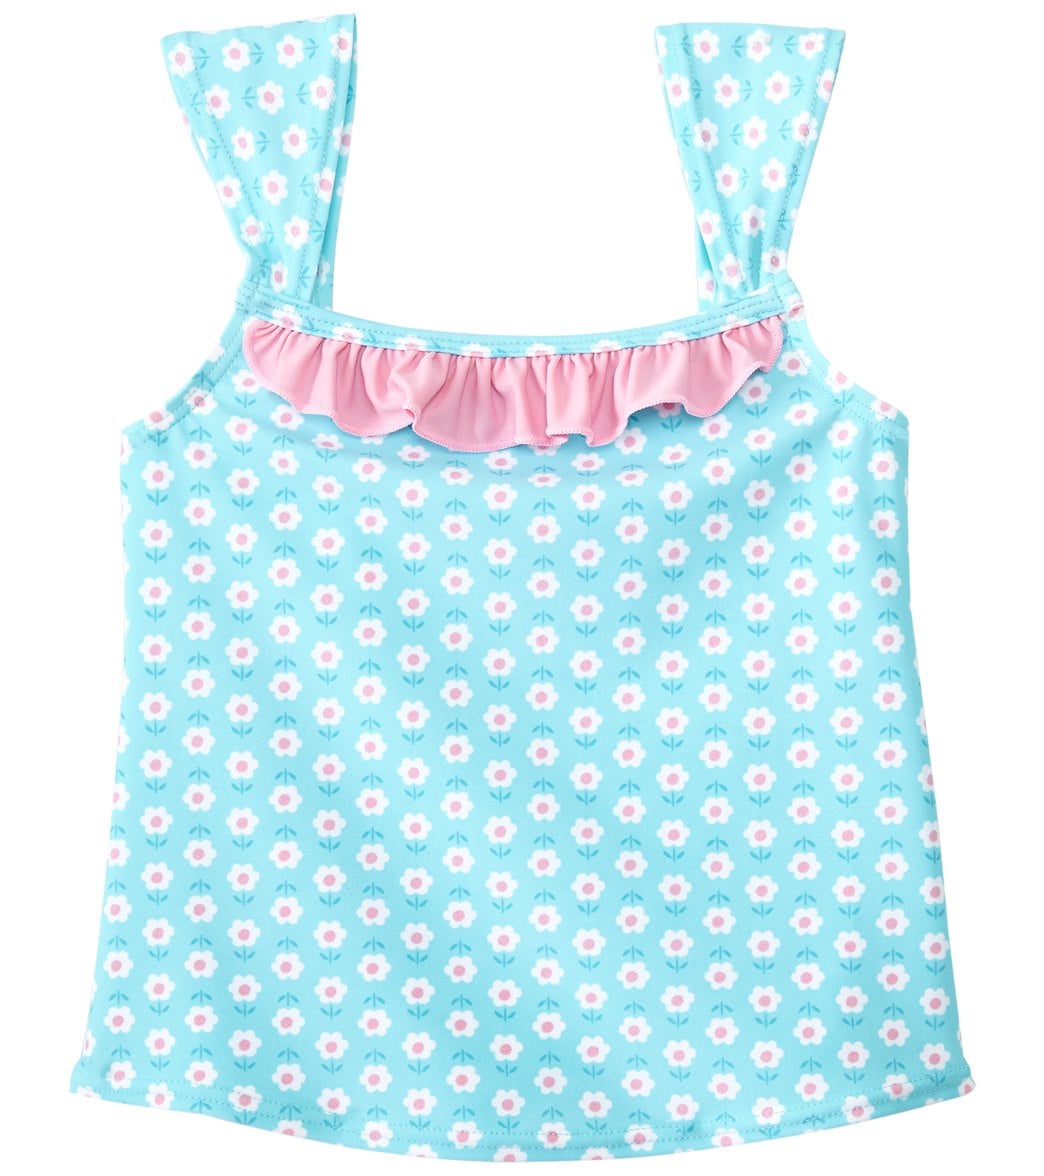 I Play. By Green Sprouts Girls' Classic Ruffle Swimsuit Top Baby - Aqua Daisy 18 Months - Swimoutlet.com